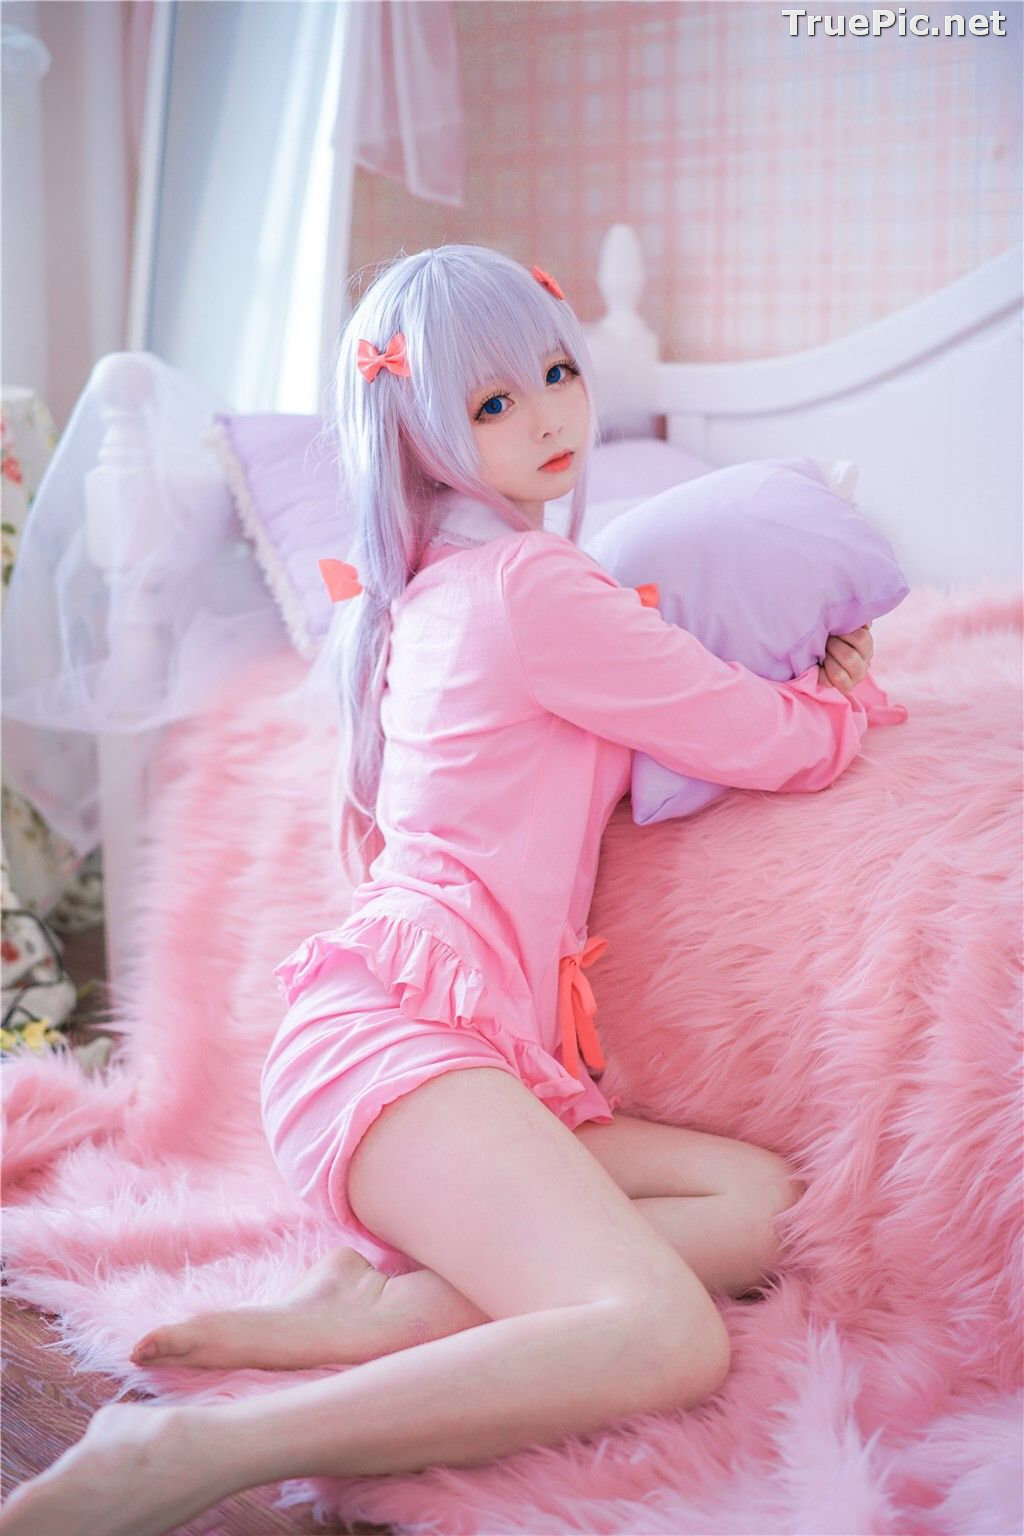 Image [MTCos] 喵糖映画 Vol.048 - Chinese Cute Model - Lovely Pink - TruePic.net - Picture-17